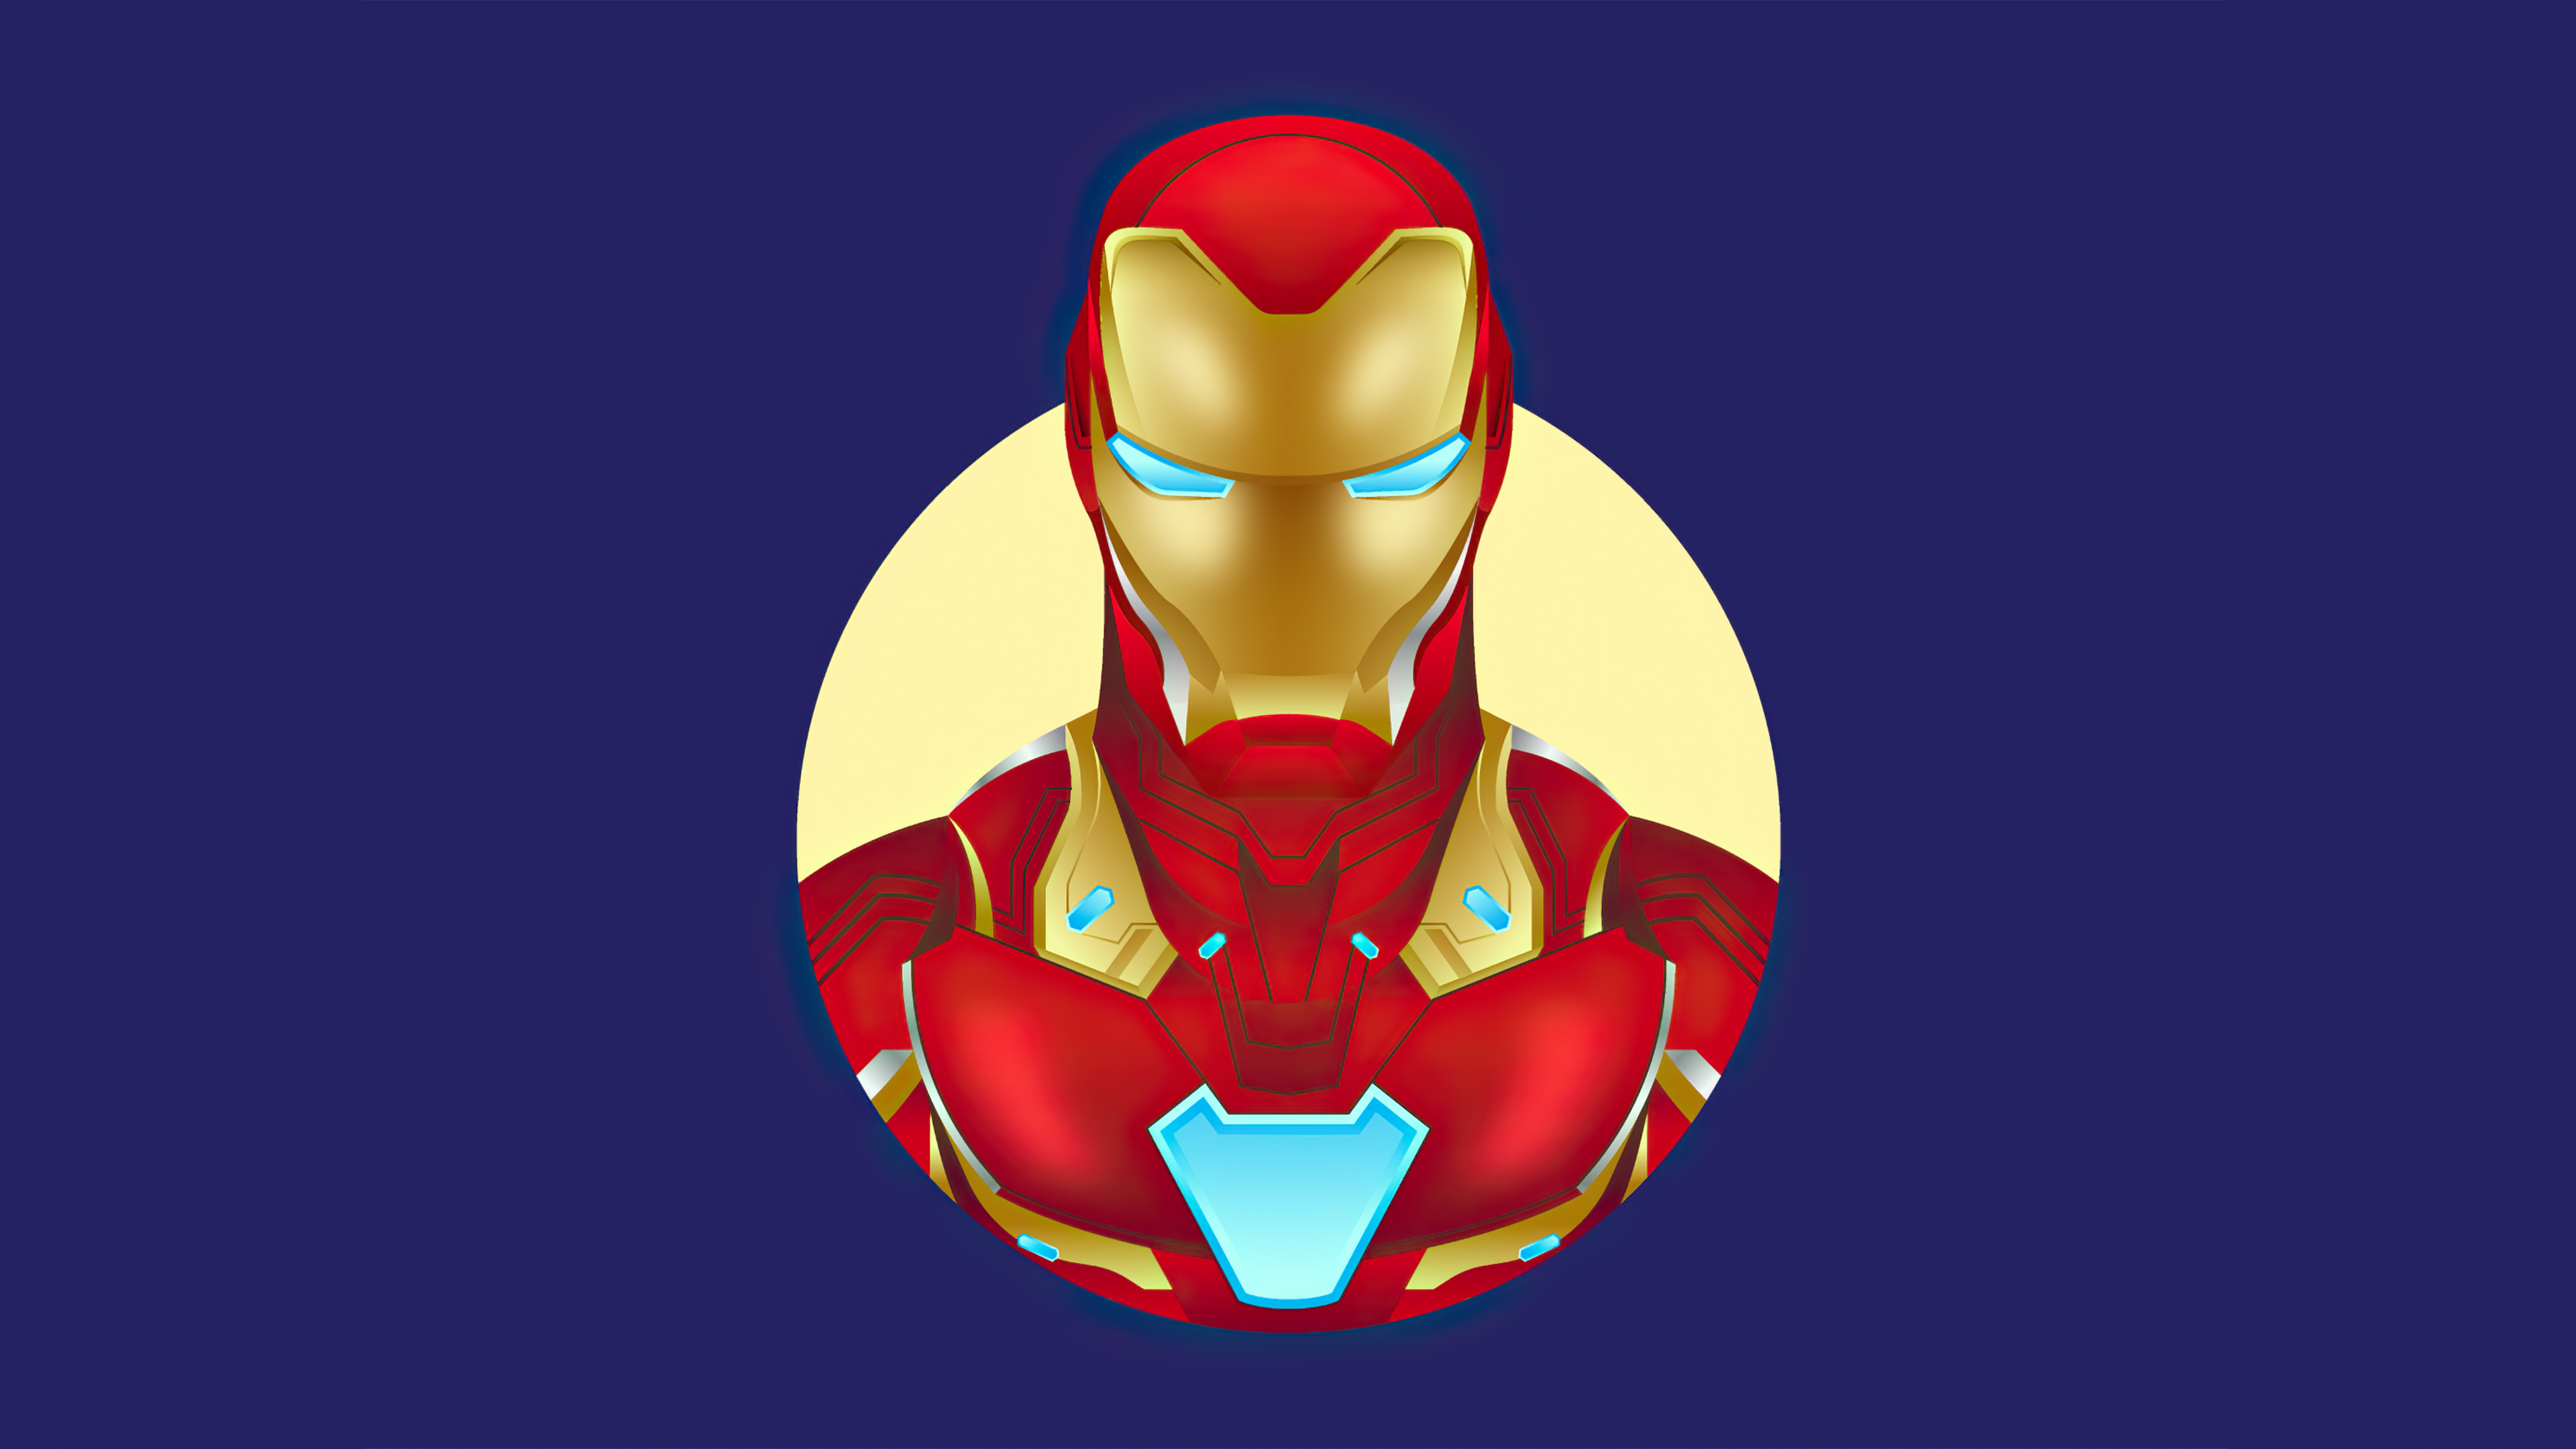 3840x2160 Iron Man Minimalism 4k 2020 4k HD 4k Wallpapers, Images,  Backgrounds, Photos and Pictures